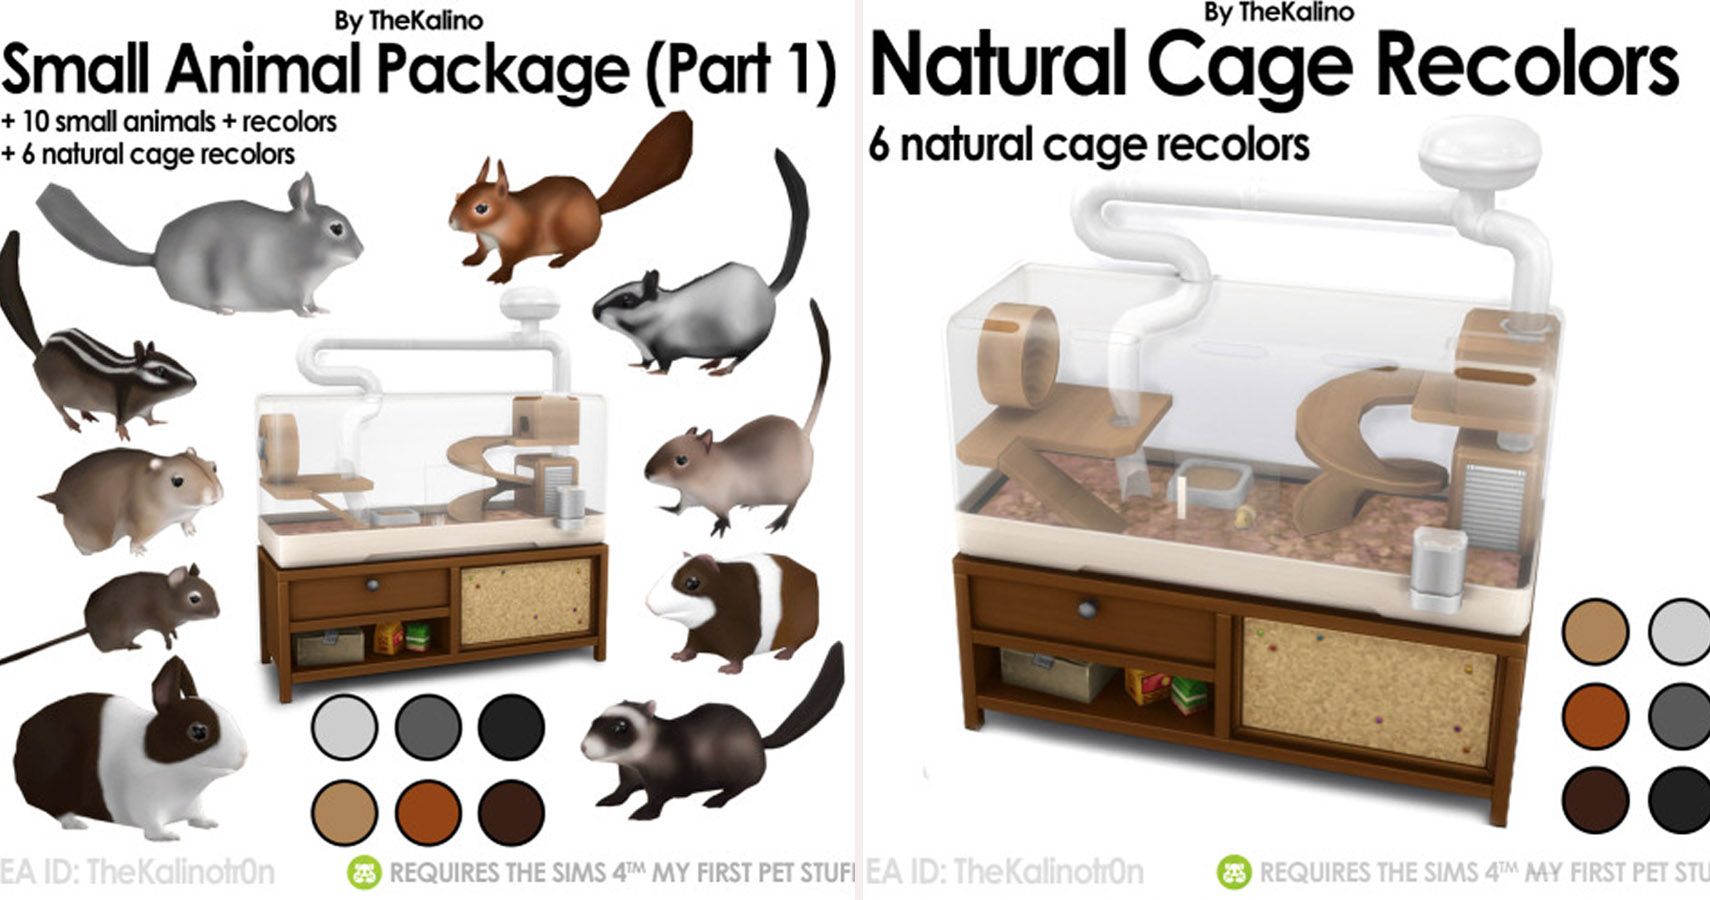 Left side 10 small rodents atround a cage. Right side recolored cage with swatches.